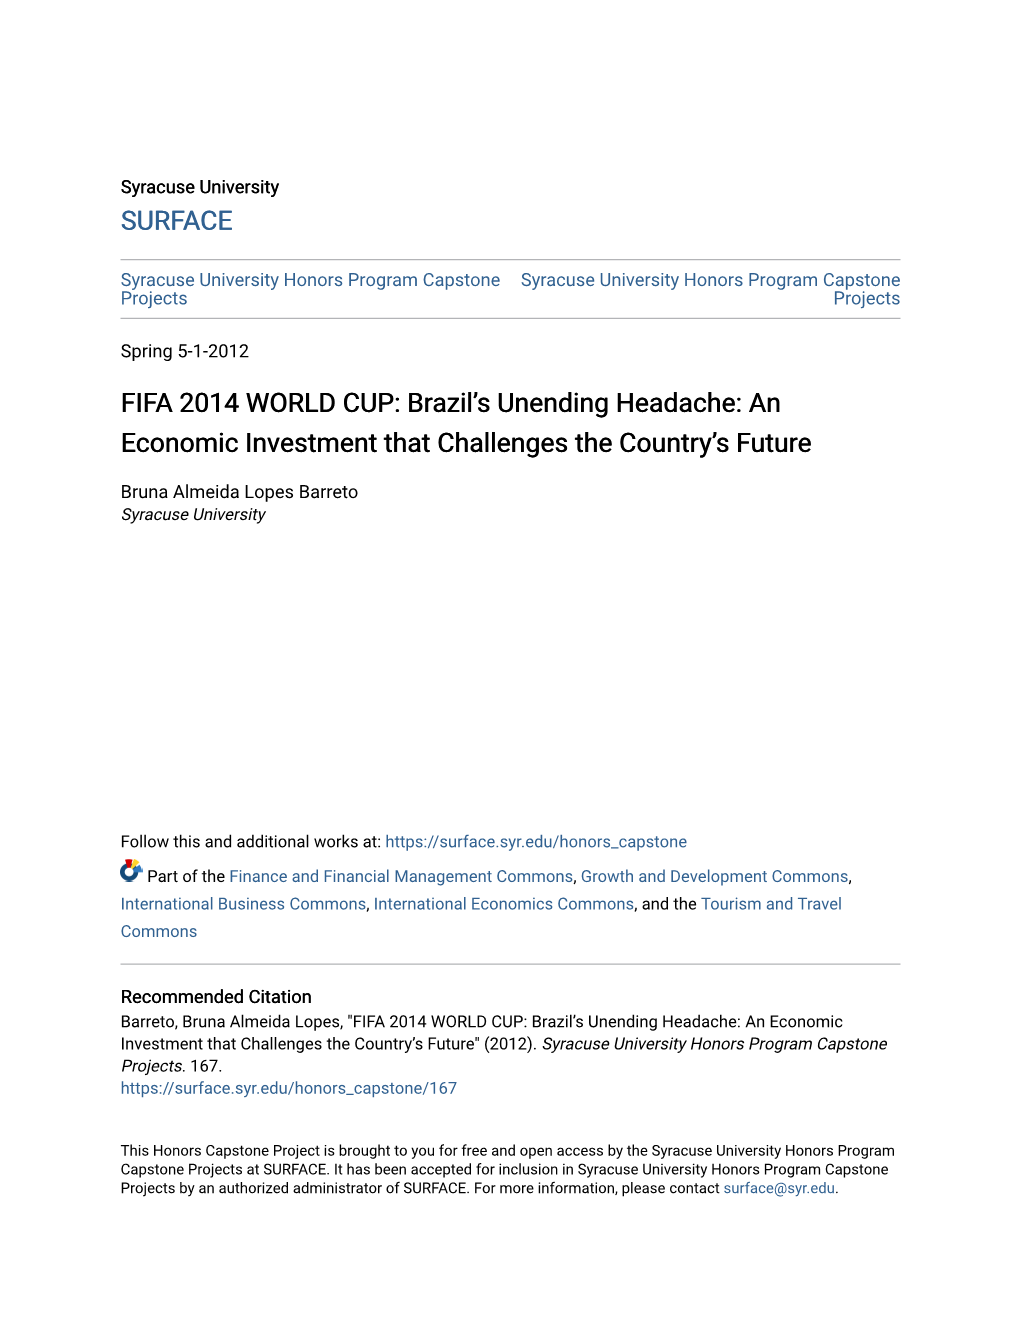 FIFA 2014 WORLD CUP: Brazil’S Unending Headache: an Economic Investment That Challenges the Country’S Future